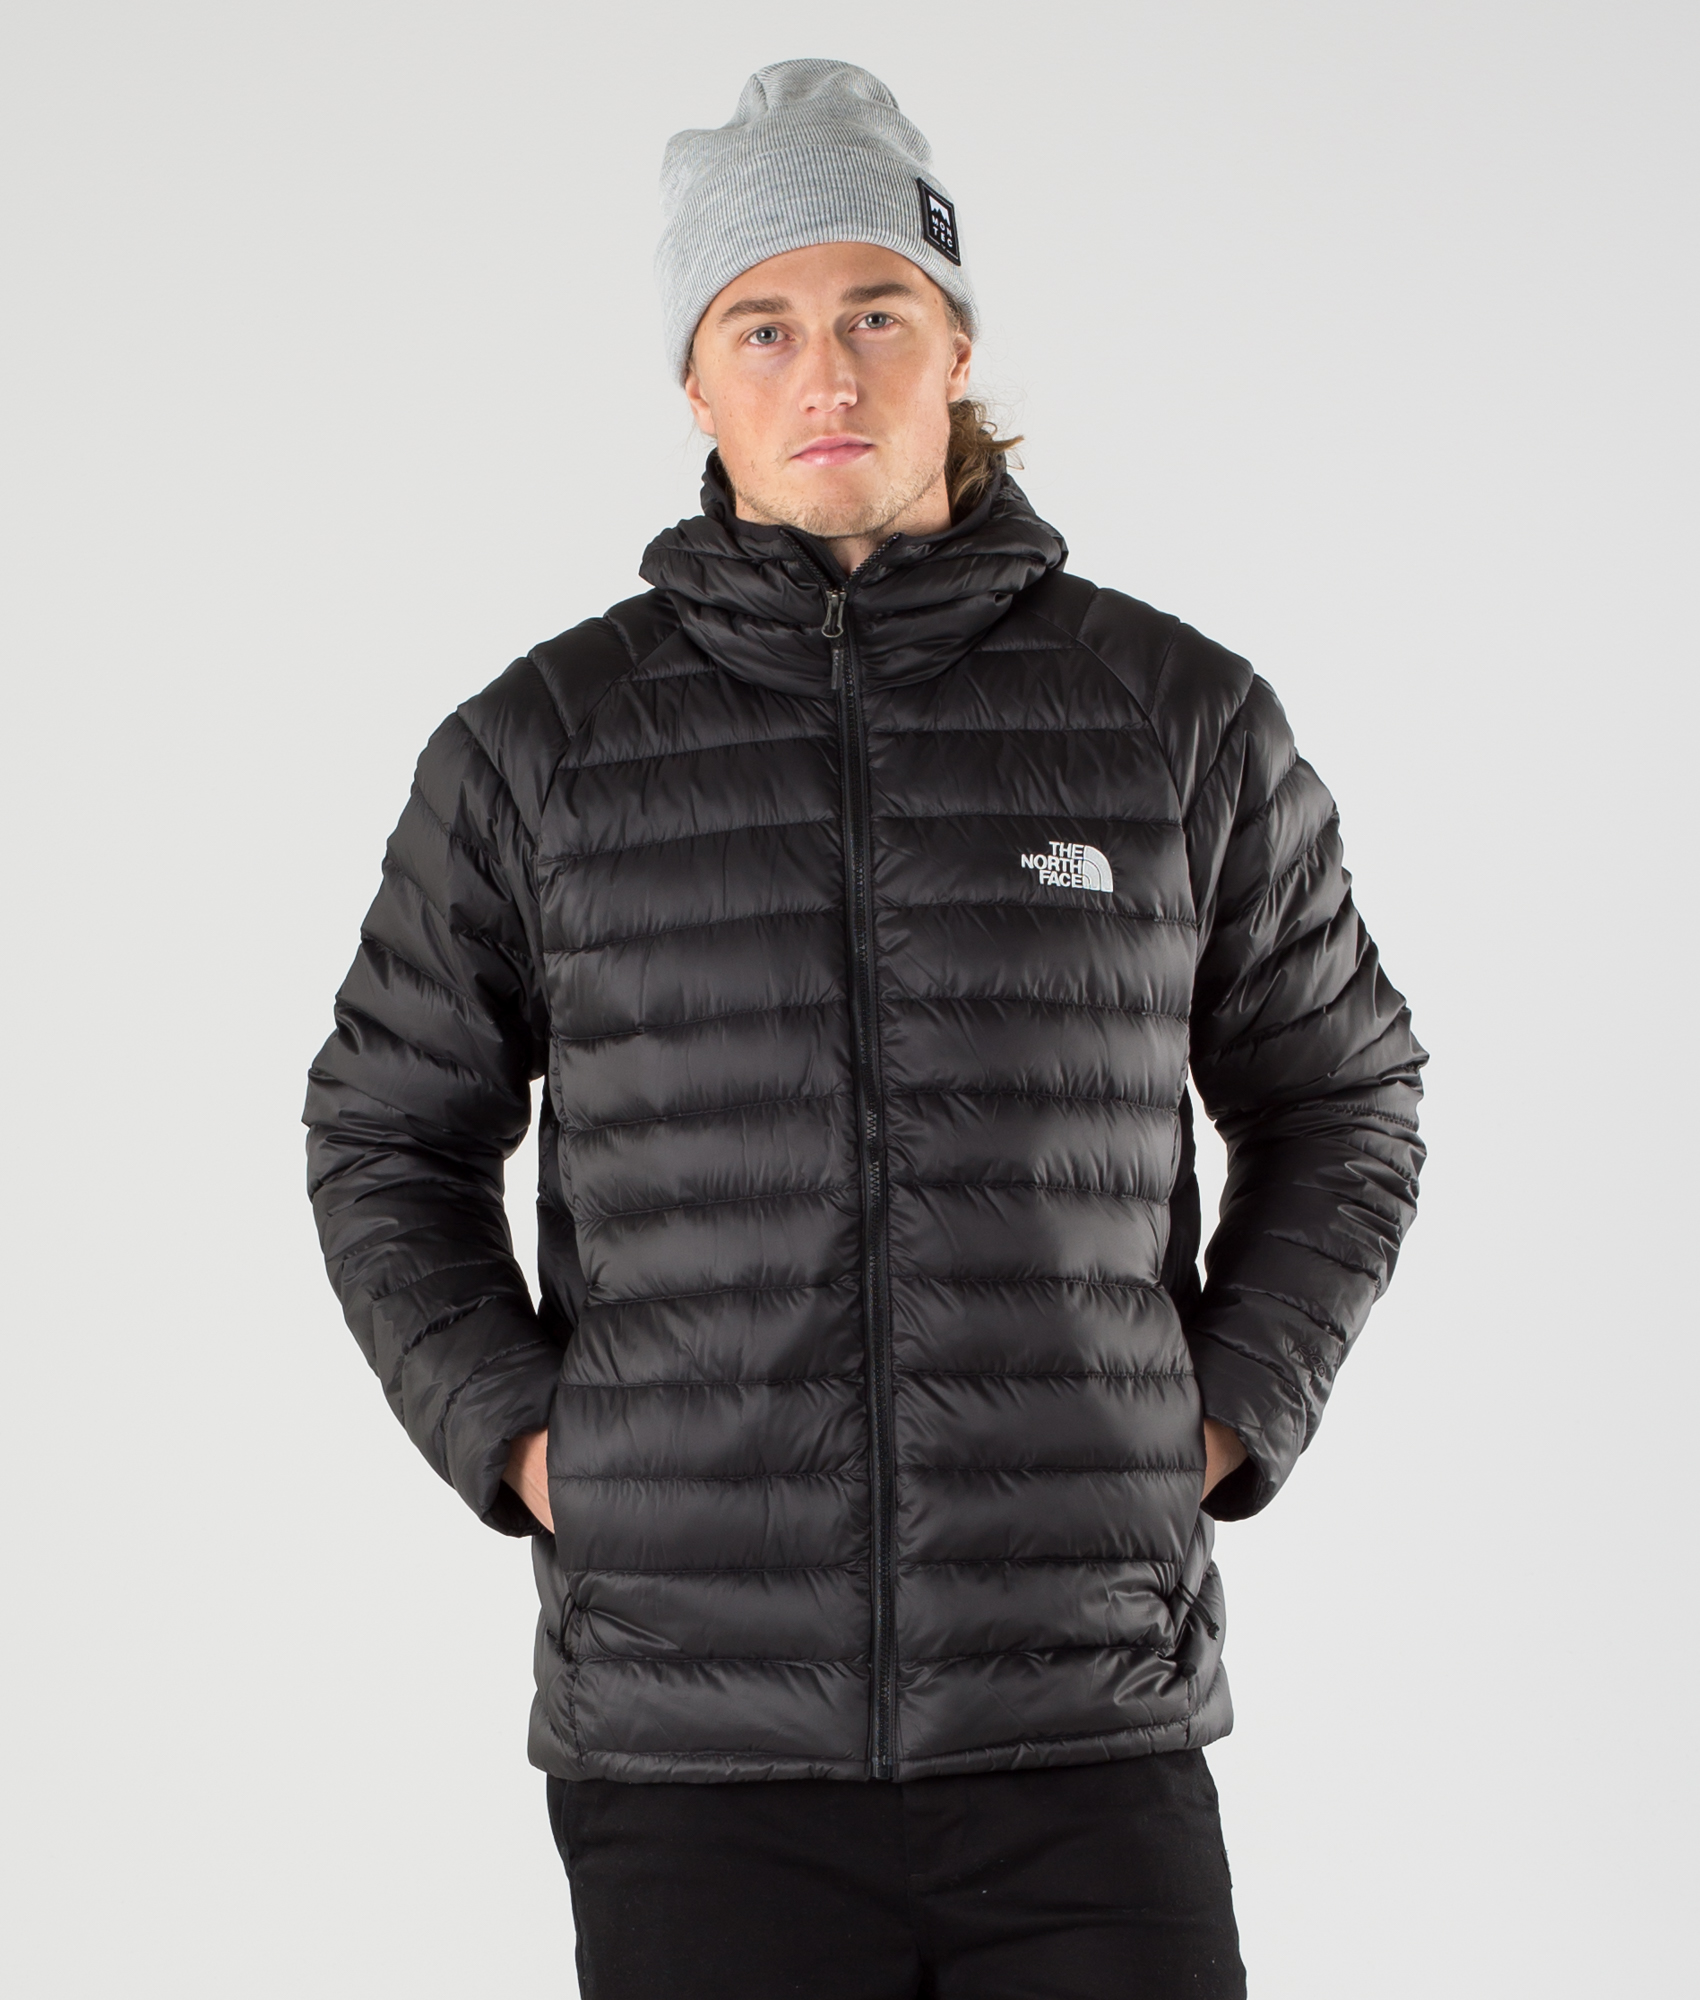 the north face trevail jacket black